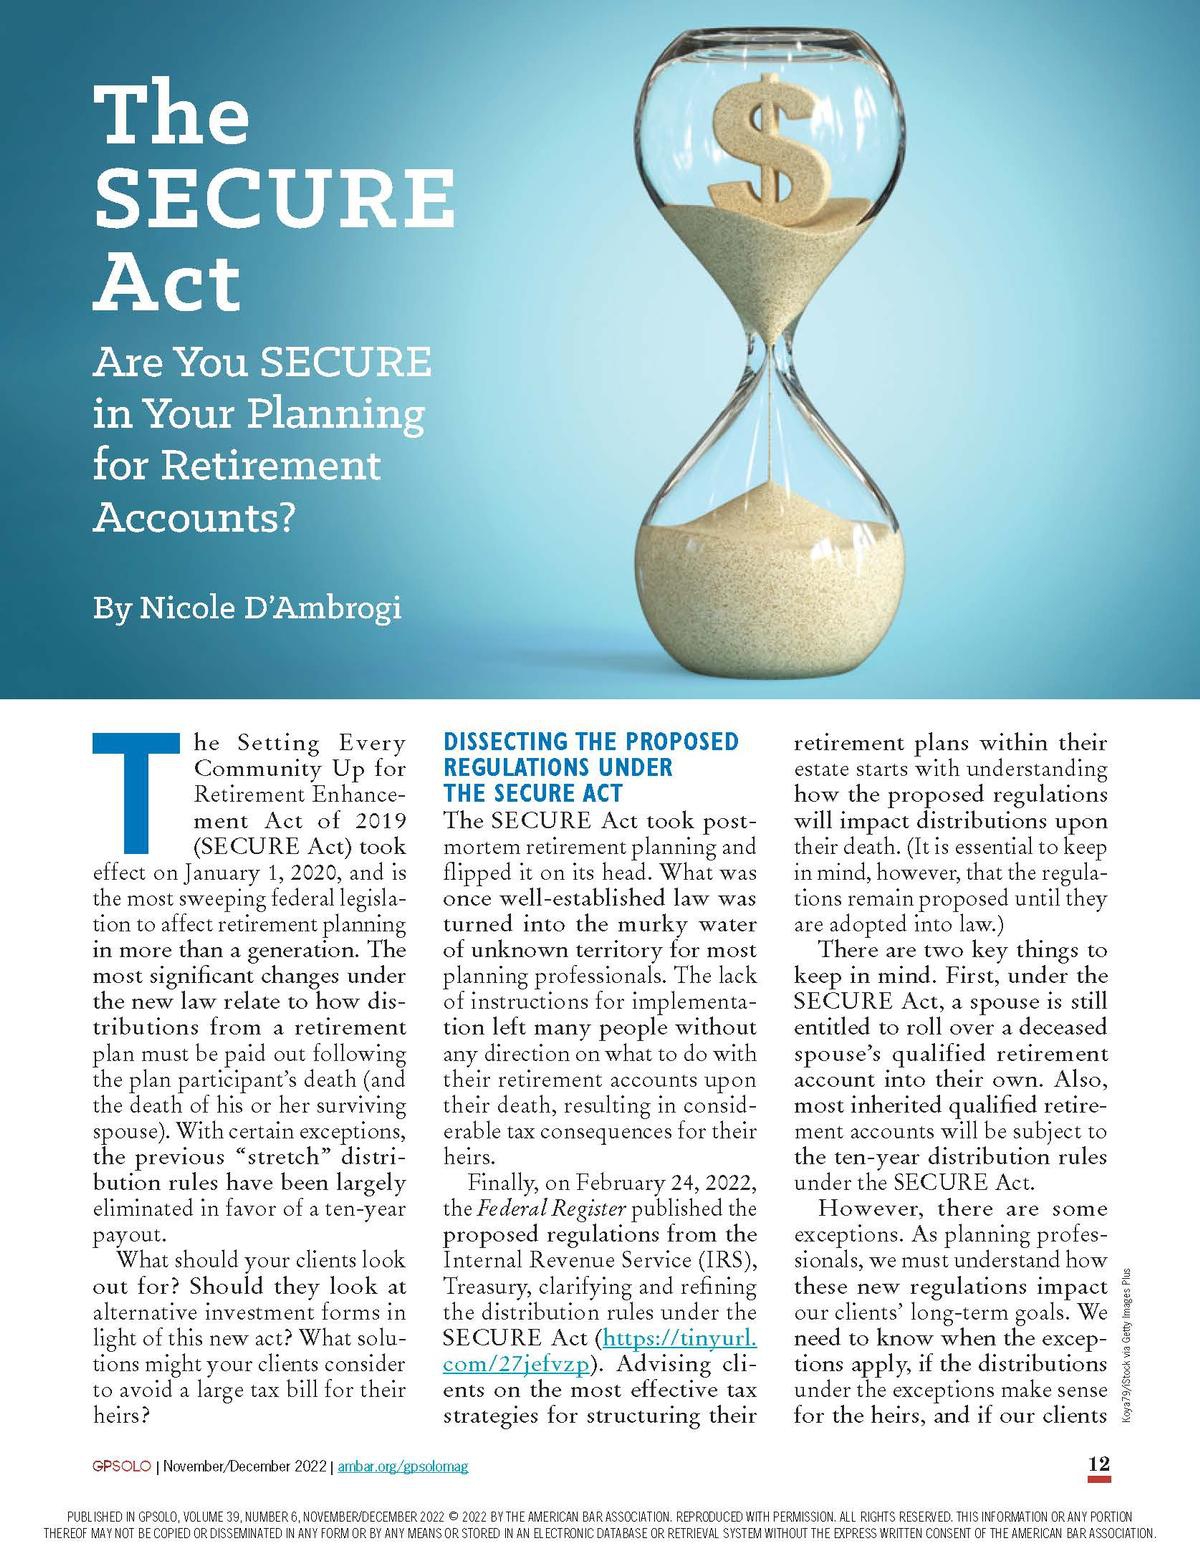 How SECURE Are Your Retirement Accounts?